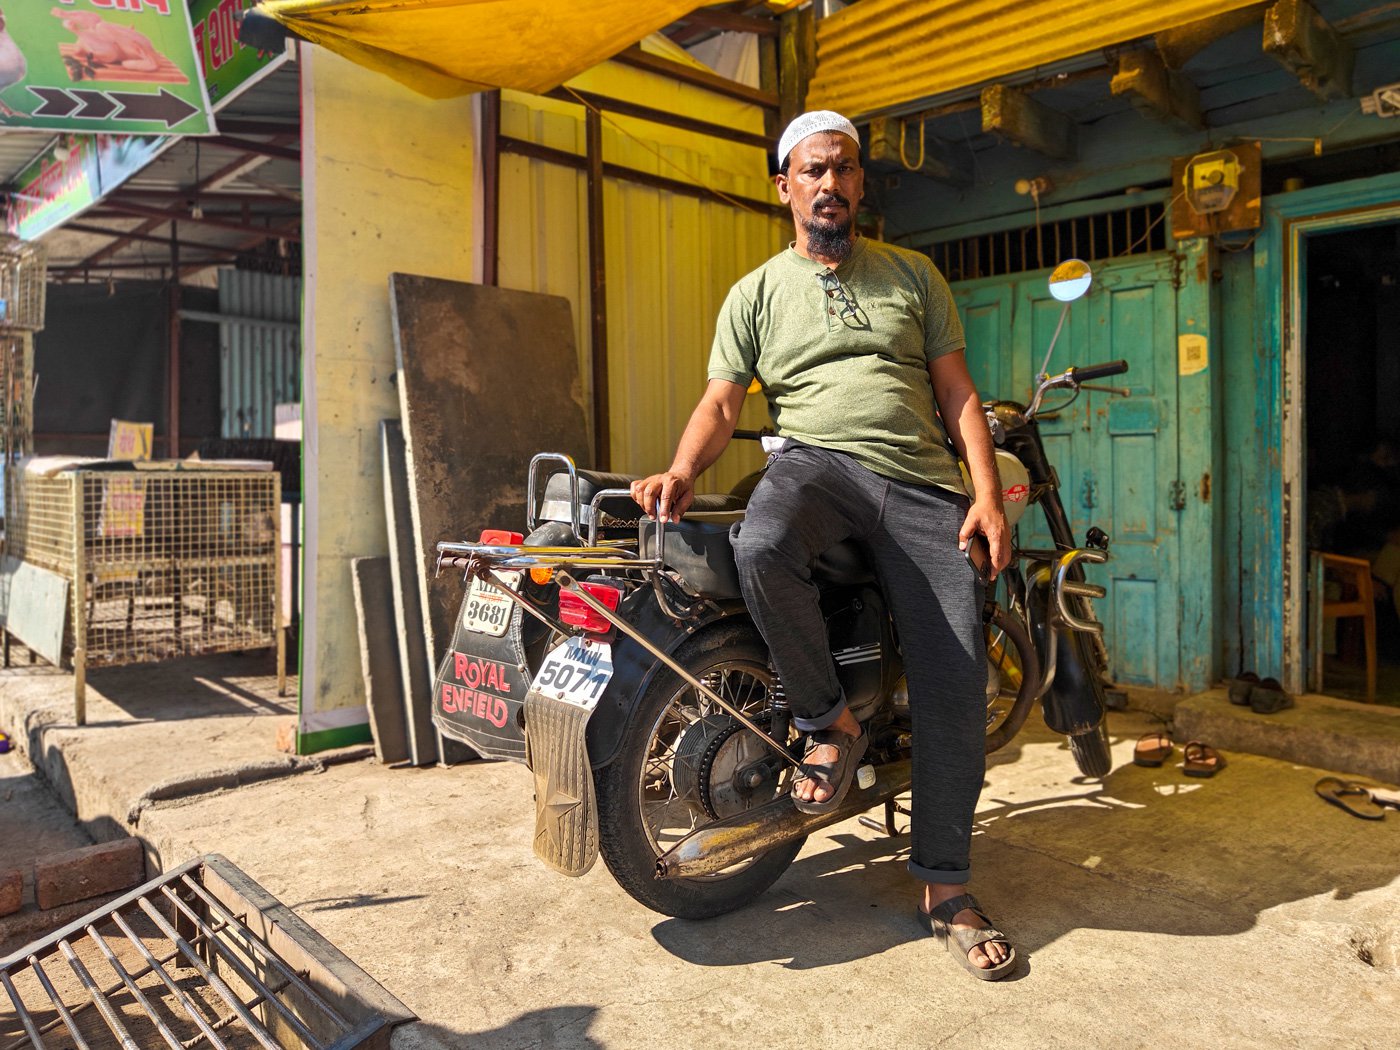 'We also said that if Adil is found guilty, he should be punished and we will condemn it,' says Siraj Bagwan, 47, who runs a garage in Pusesavali village